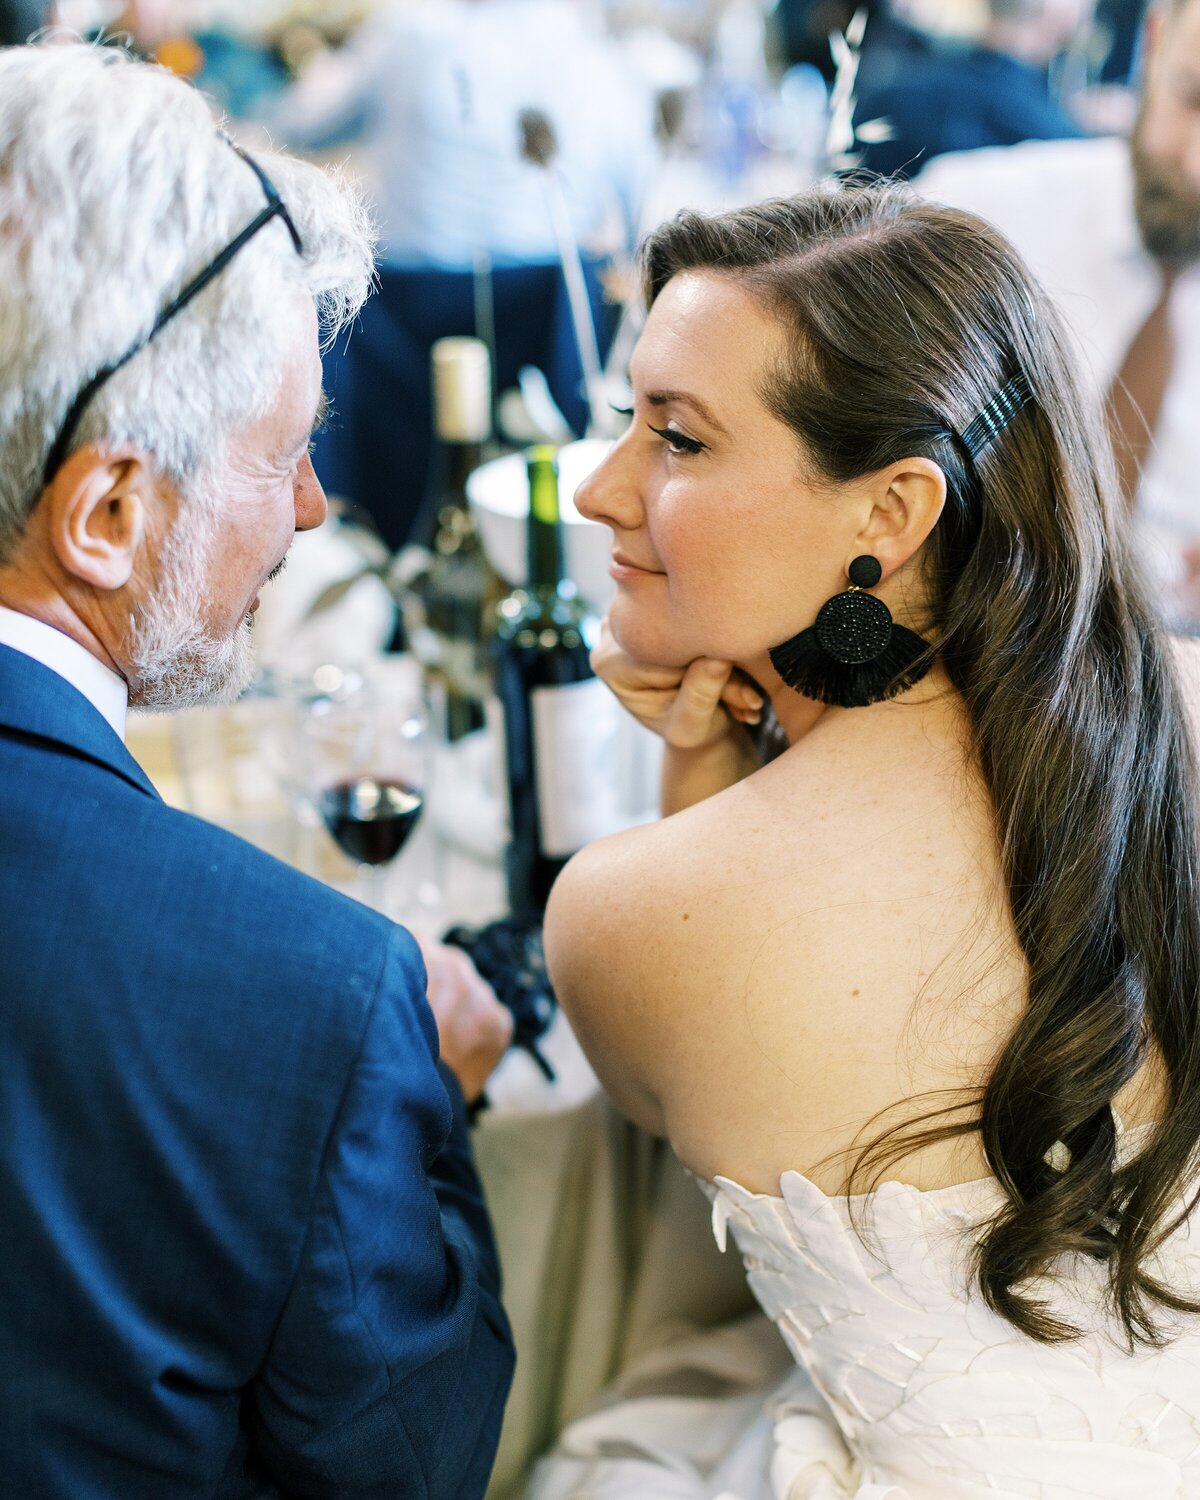 Bride gazes into grooms eyes during dinner at their Sausalito wedding reception